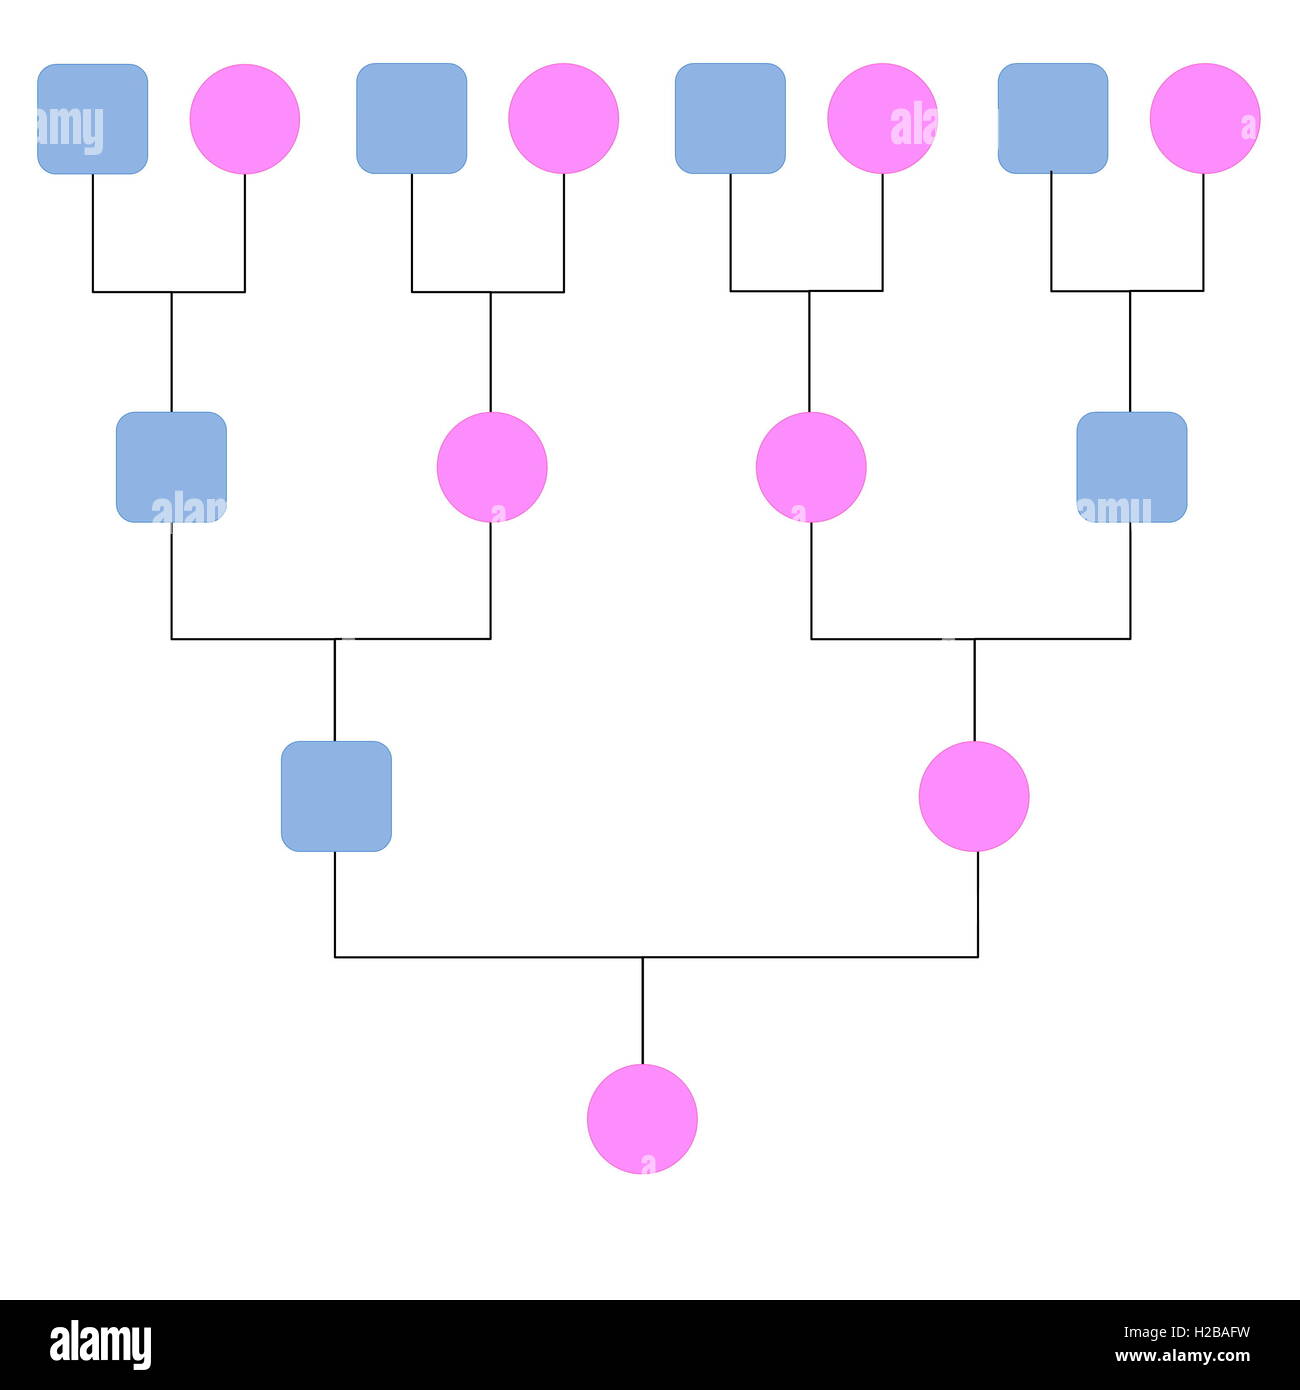 Genealogy Cut Out Stock Images & Pictures - Alamy